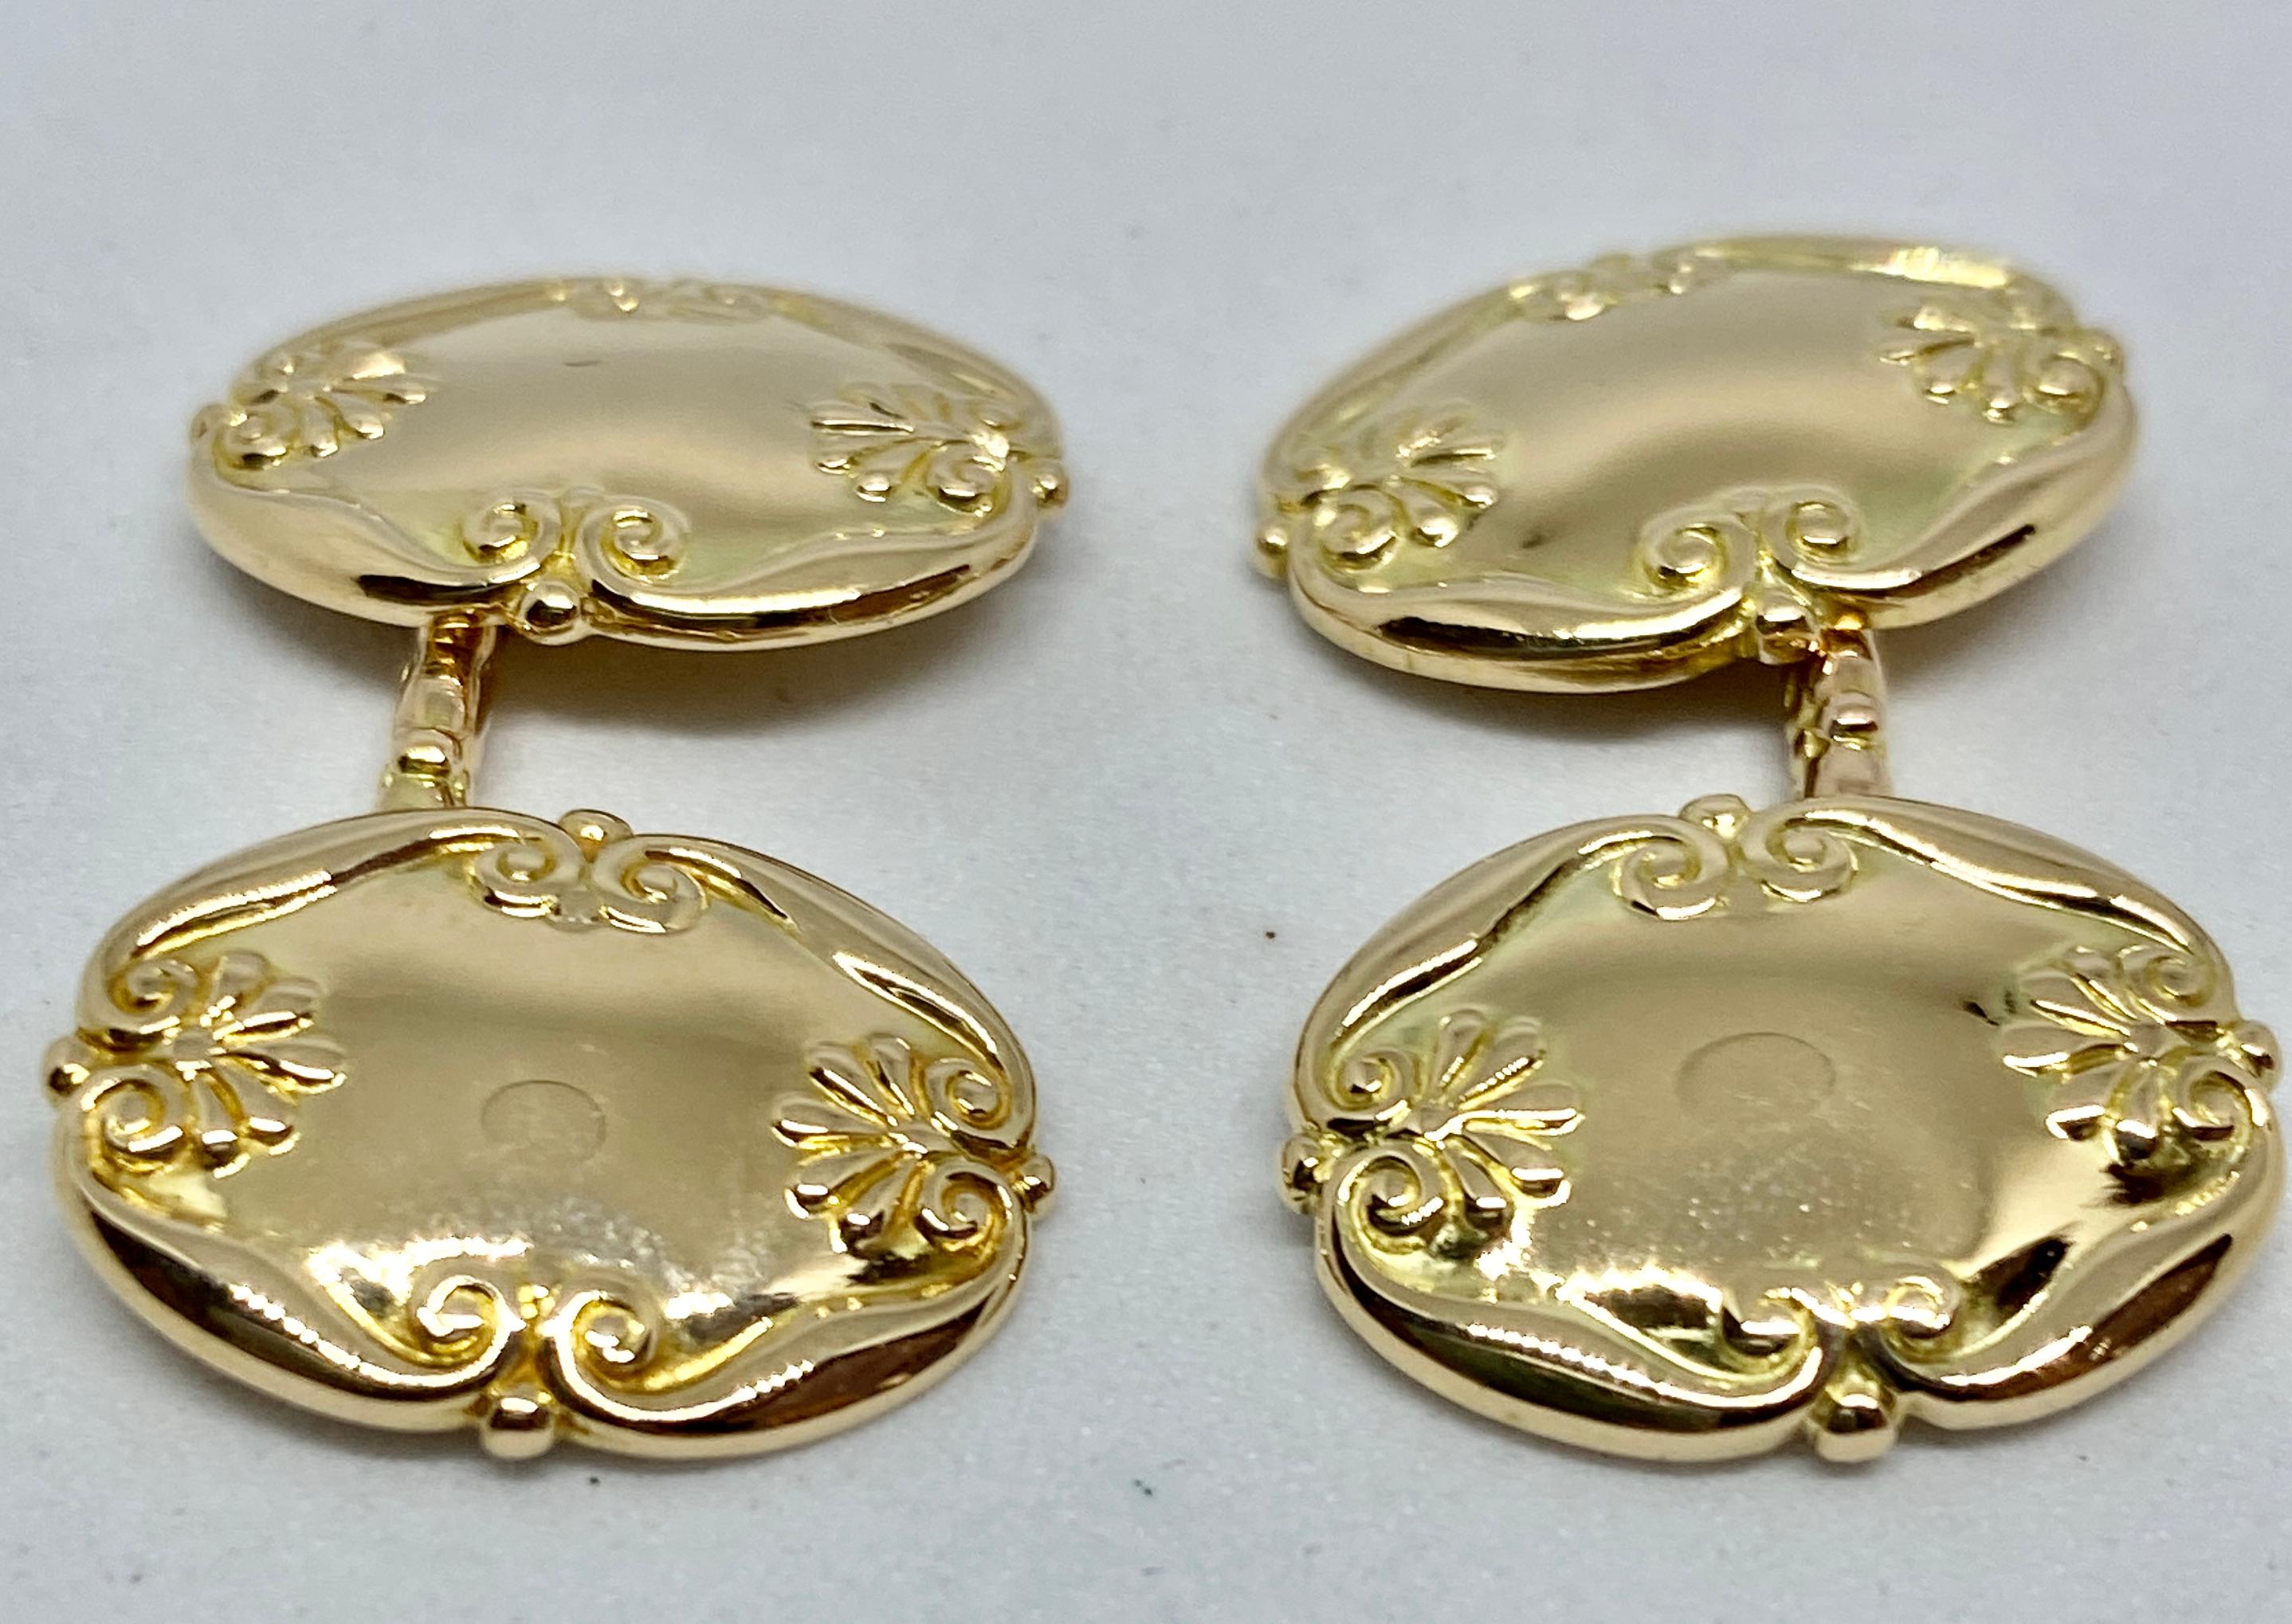 Art Nouveau Cufflinks in Yellow Gold by Marcus & Company For Sale 3